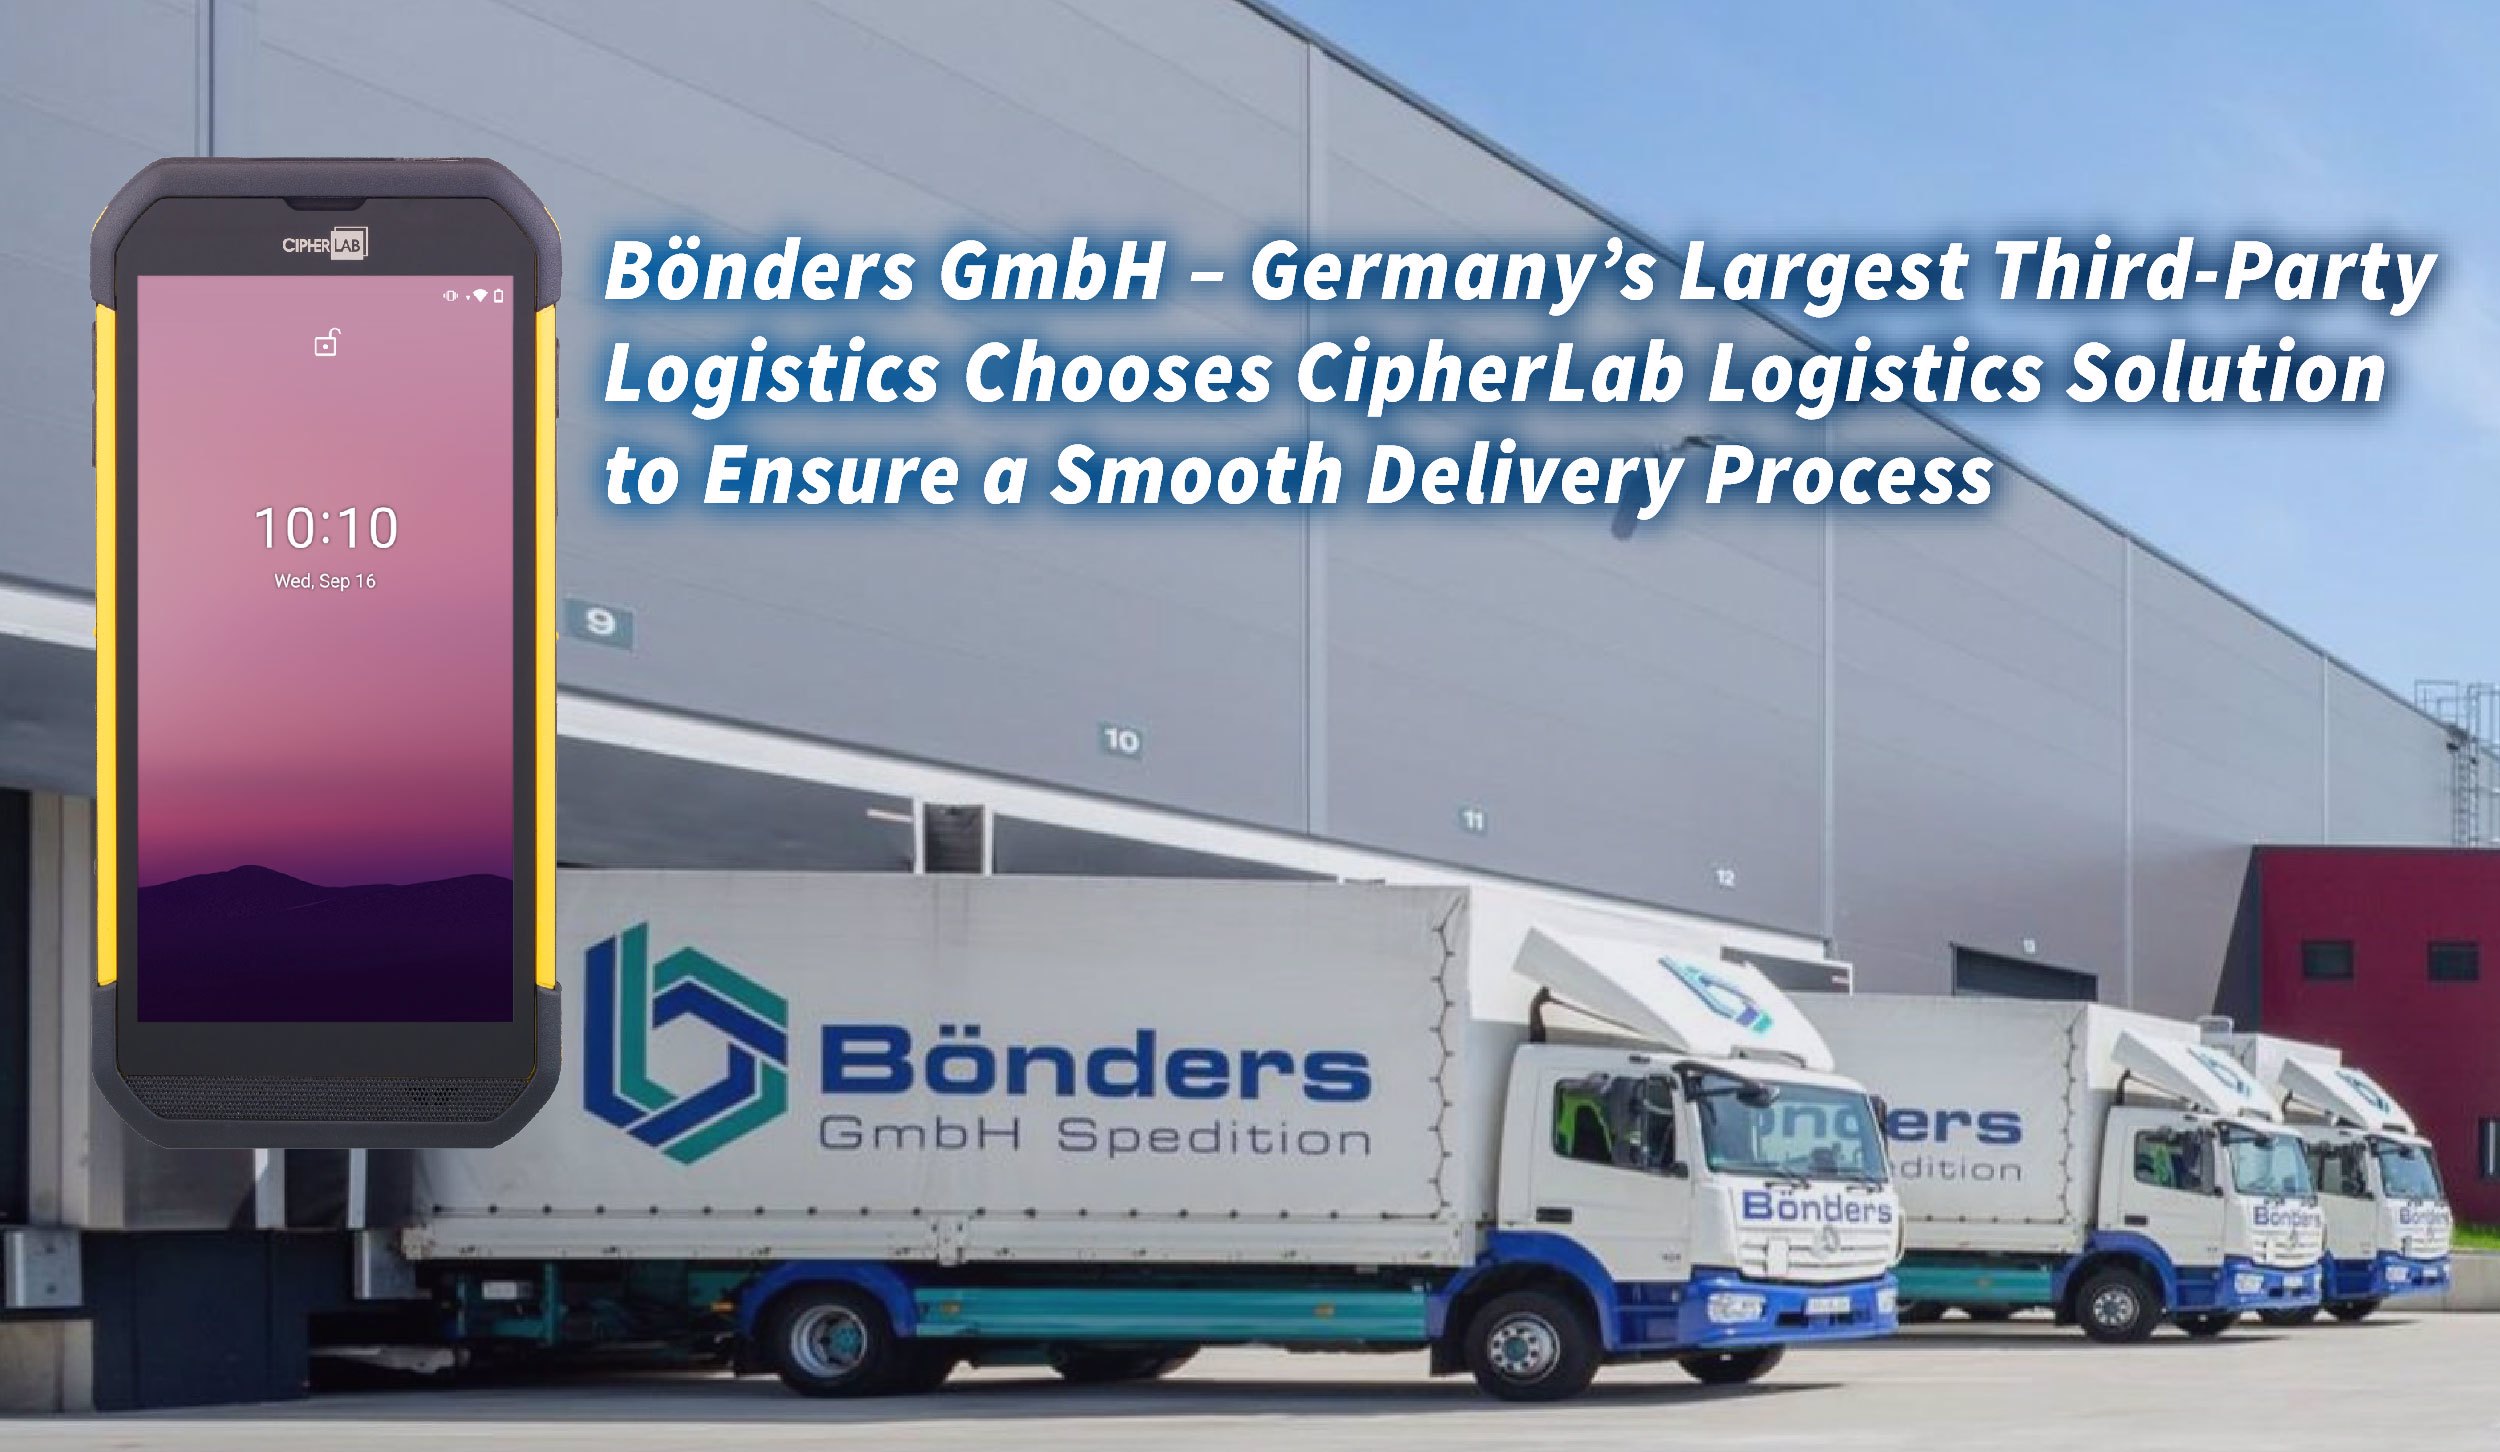 Bönders GmbH – Germany’s Largest Third-Party Logistics Chooses CipherLab Logistics Solution to Ensure a Smooth Delivery Process